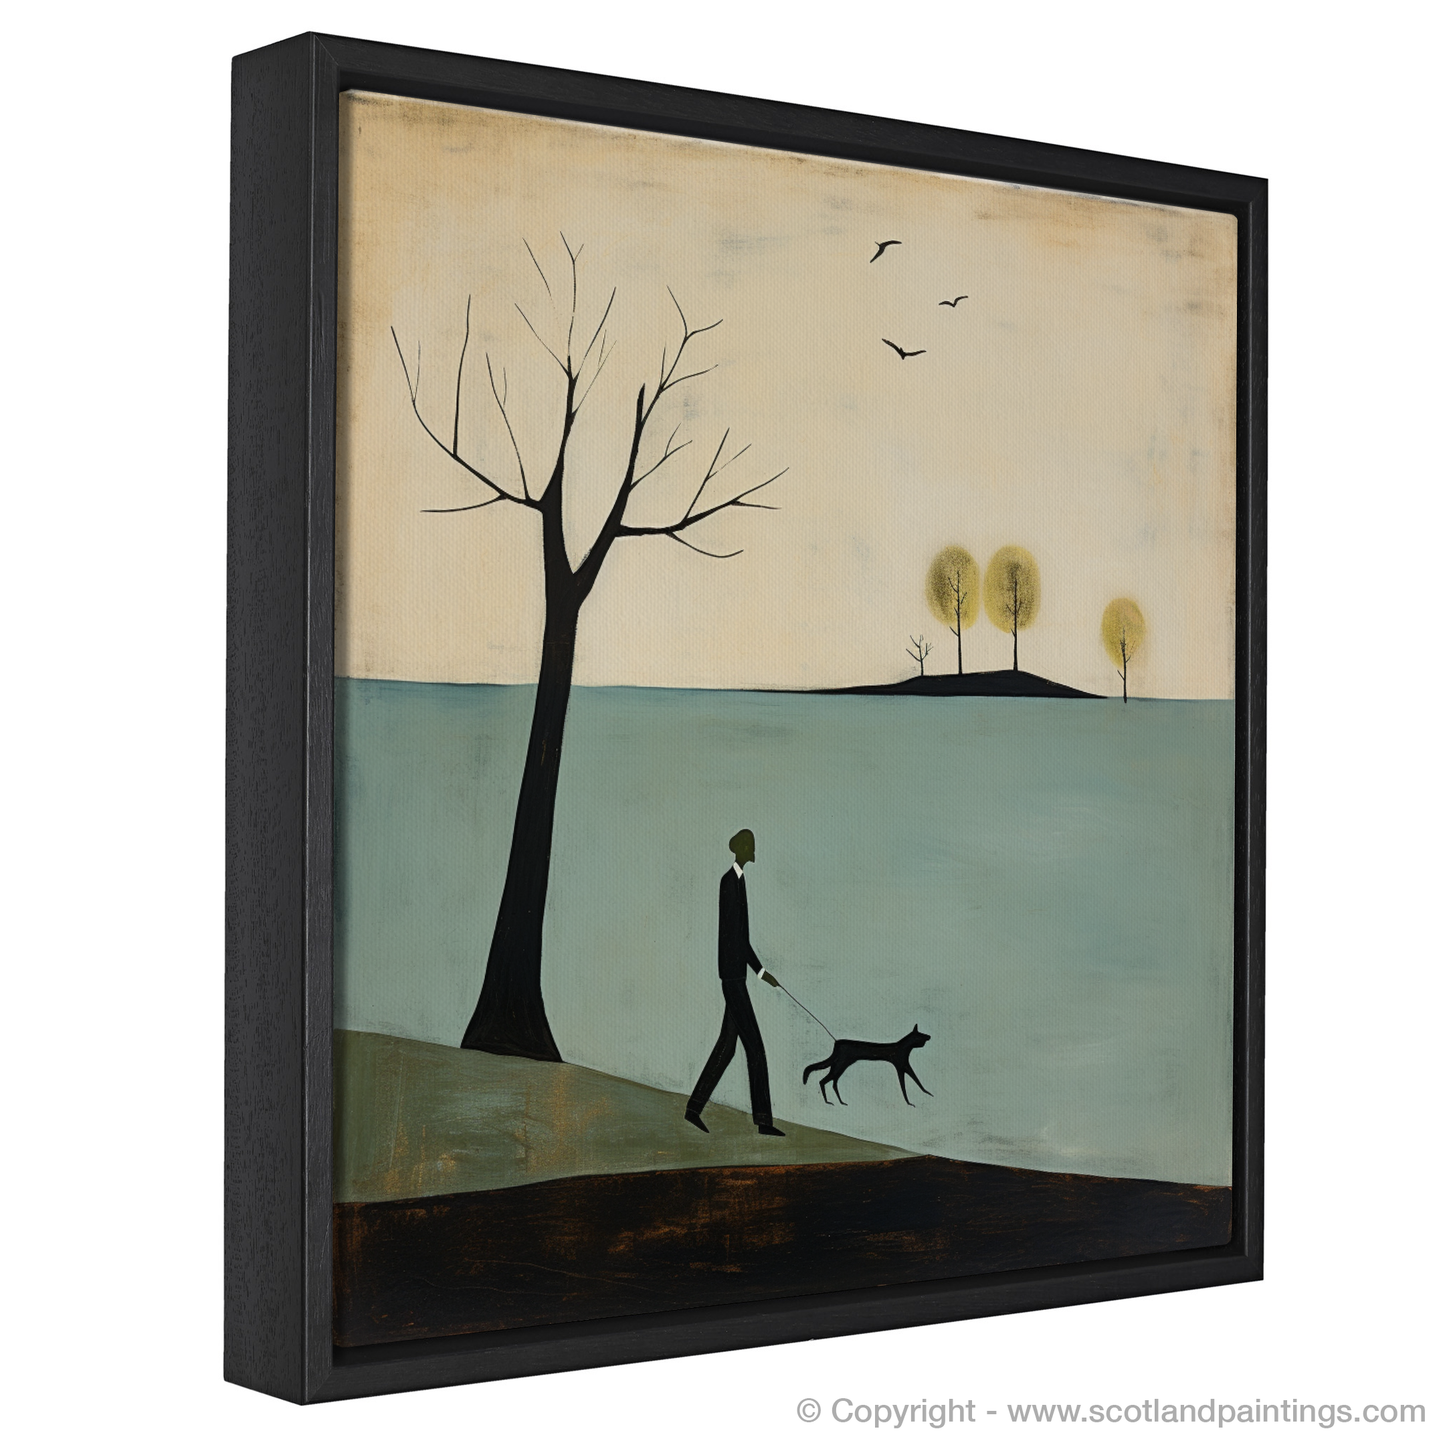 Painting and Art Print of A man walking dog at the side of Loch Lomond entitled "Walking with a Friend at Loch Lomond".